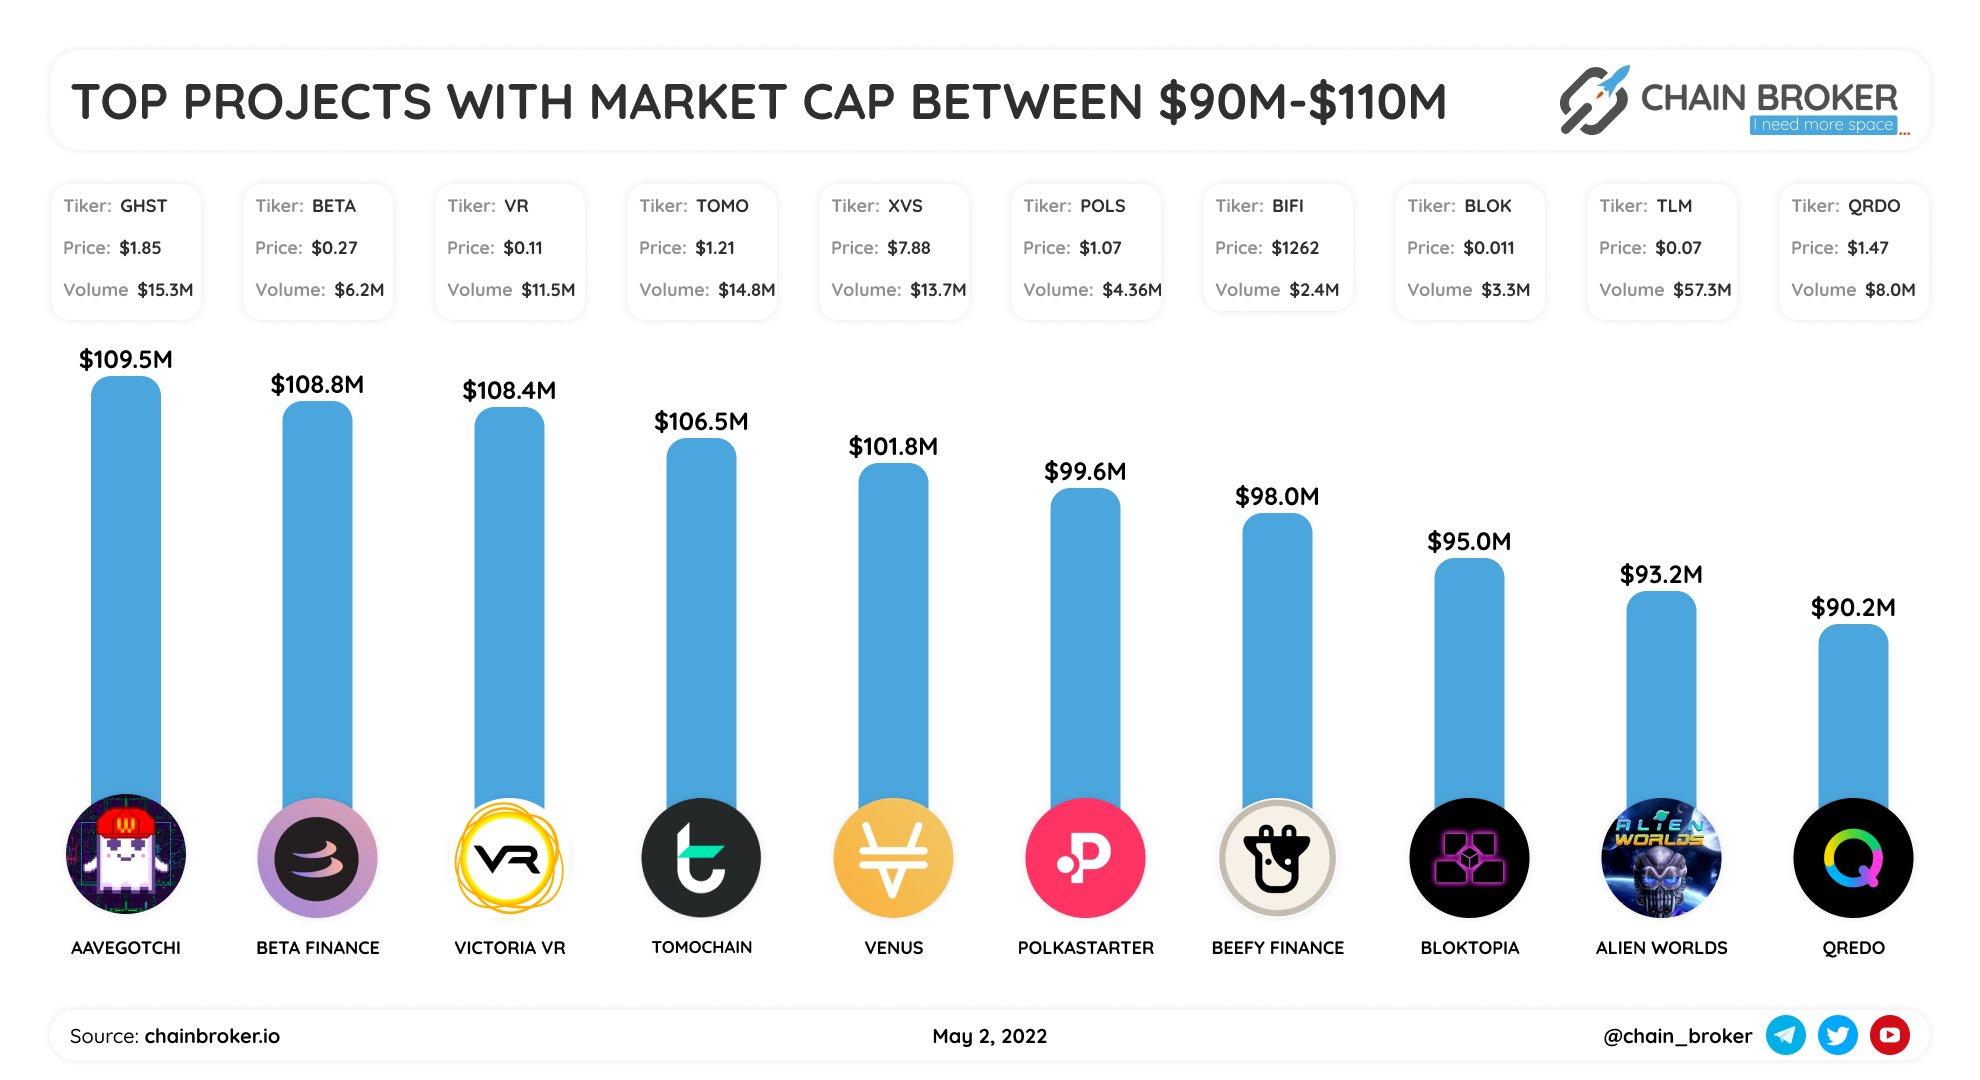 Top projects with market cap between $90M-$110M